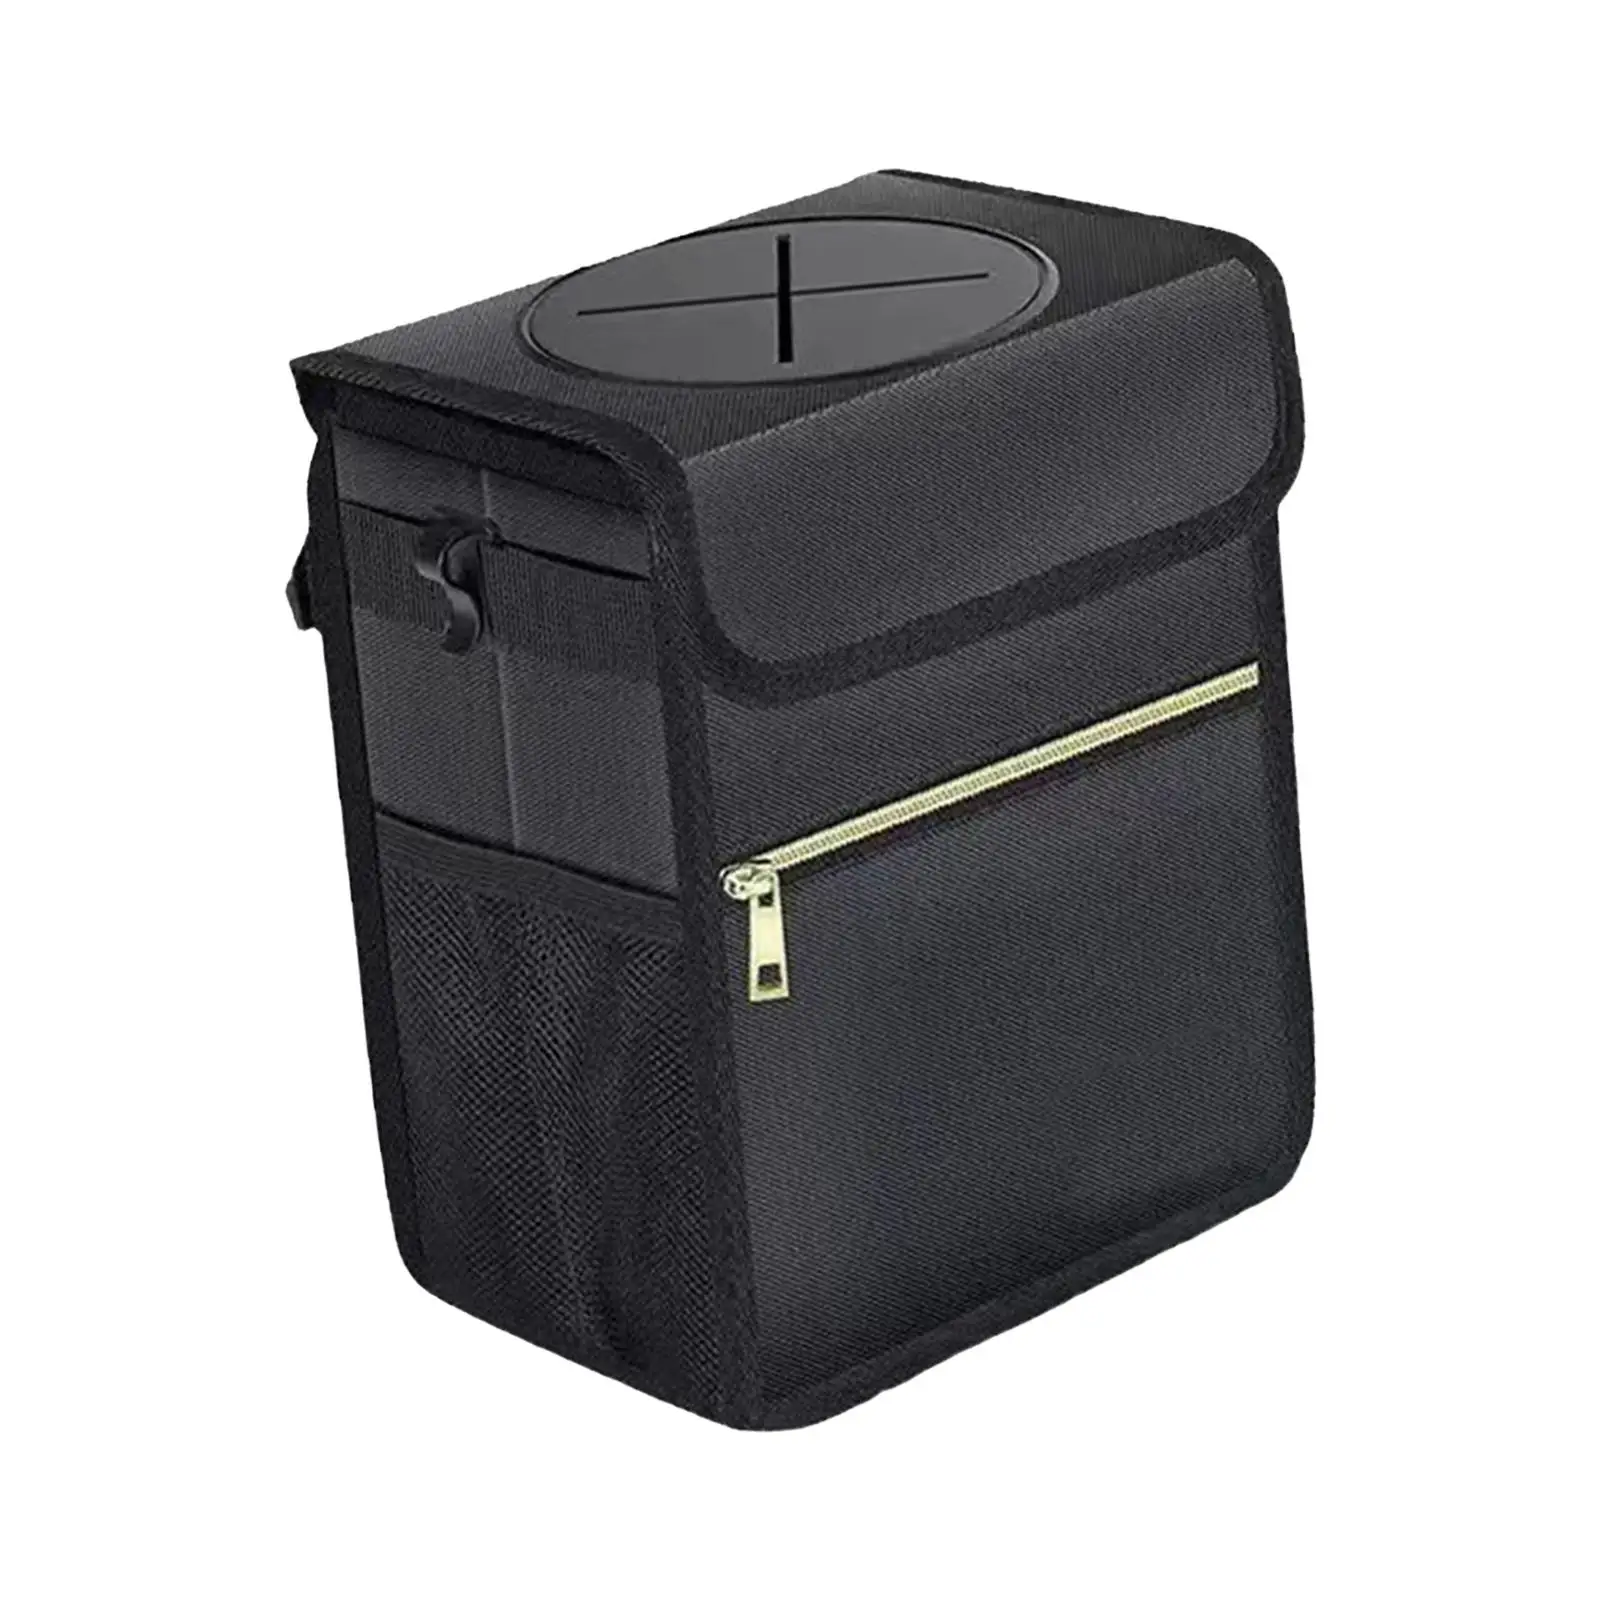 Car Trash Can with Lid Folding Storage Pocket Practical Car Travel Accessories Multifunctional Scratch Resistant Leakproof